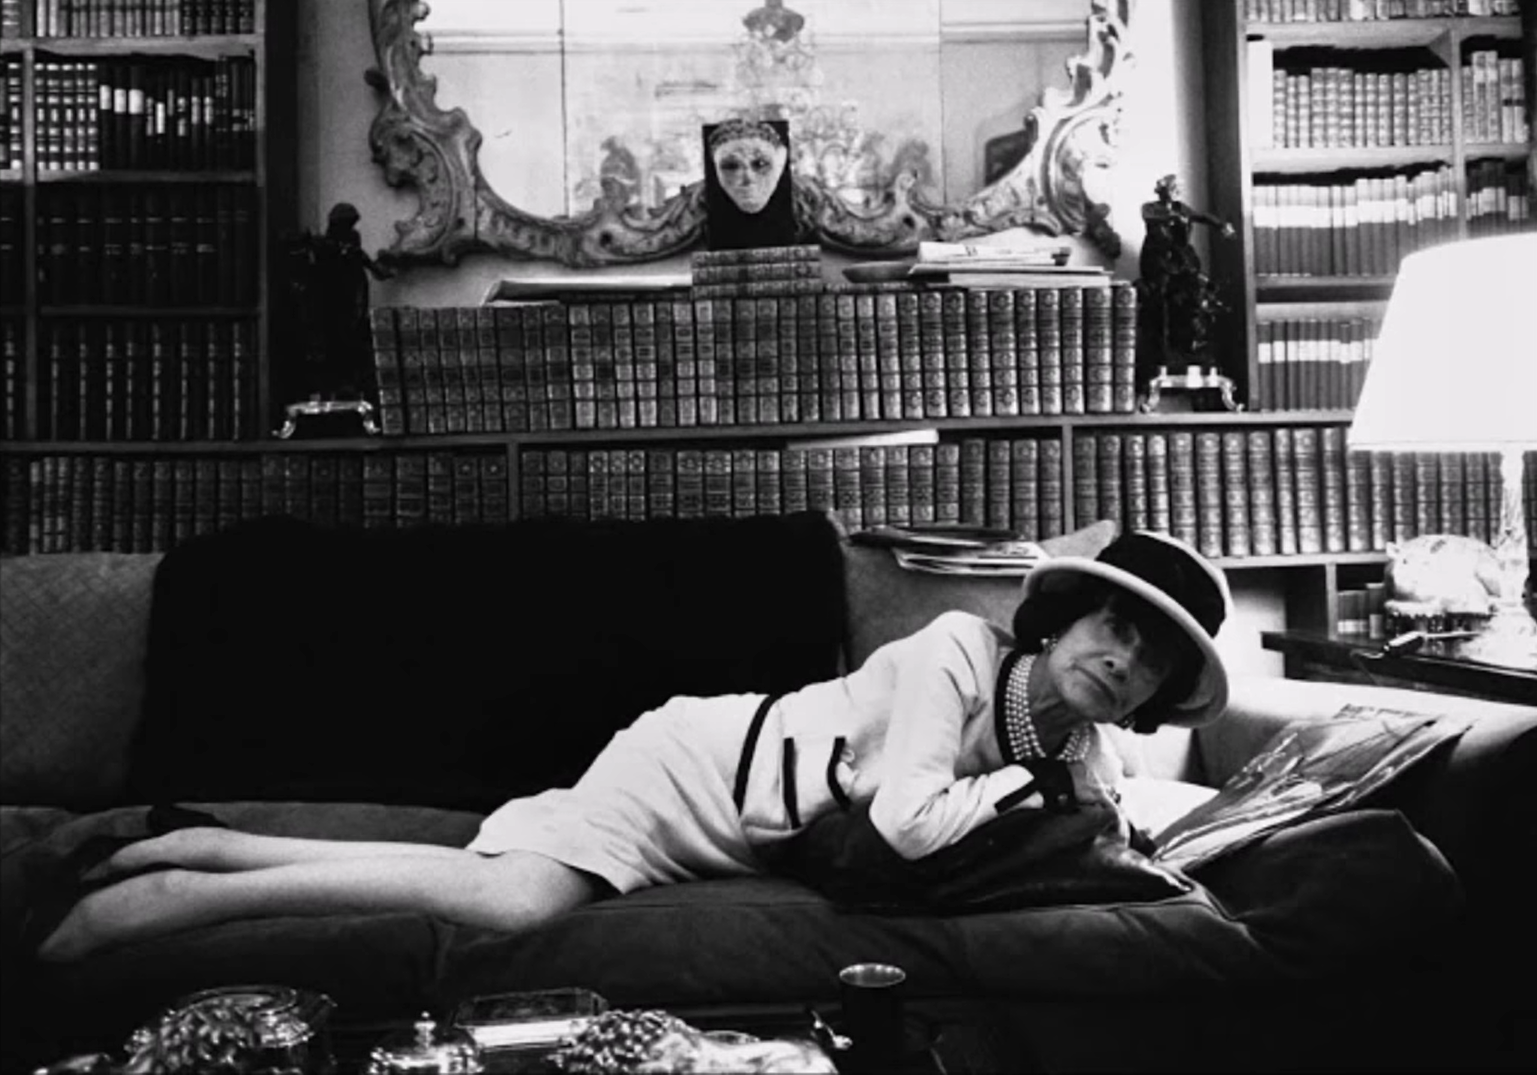 gabrielle chanel on black sofa in her room - black and wite retro photo